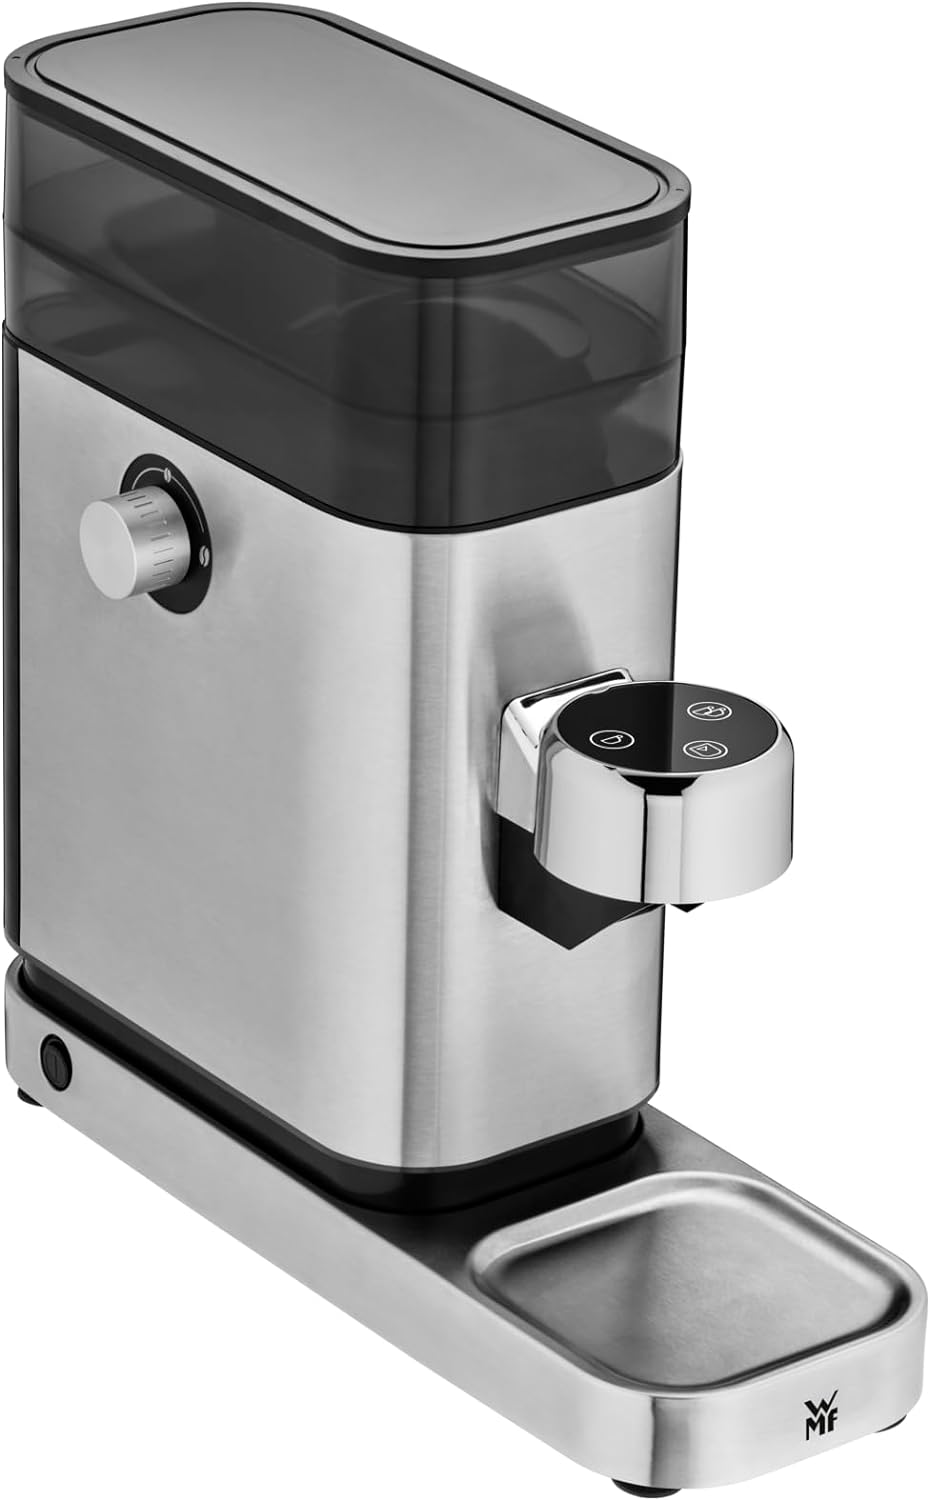 WMF Lumero Electric Espresso Grinder, 150 watts, LED Touch Buttons, 40 Grinding Levels, Coffee Ground Container, Cromargan Stainless Steel Matt